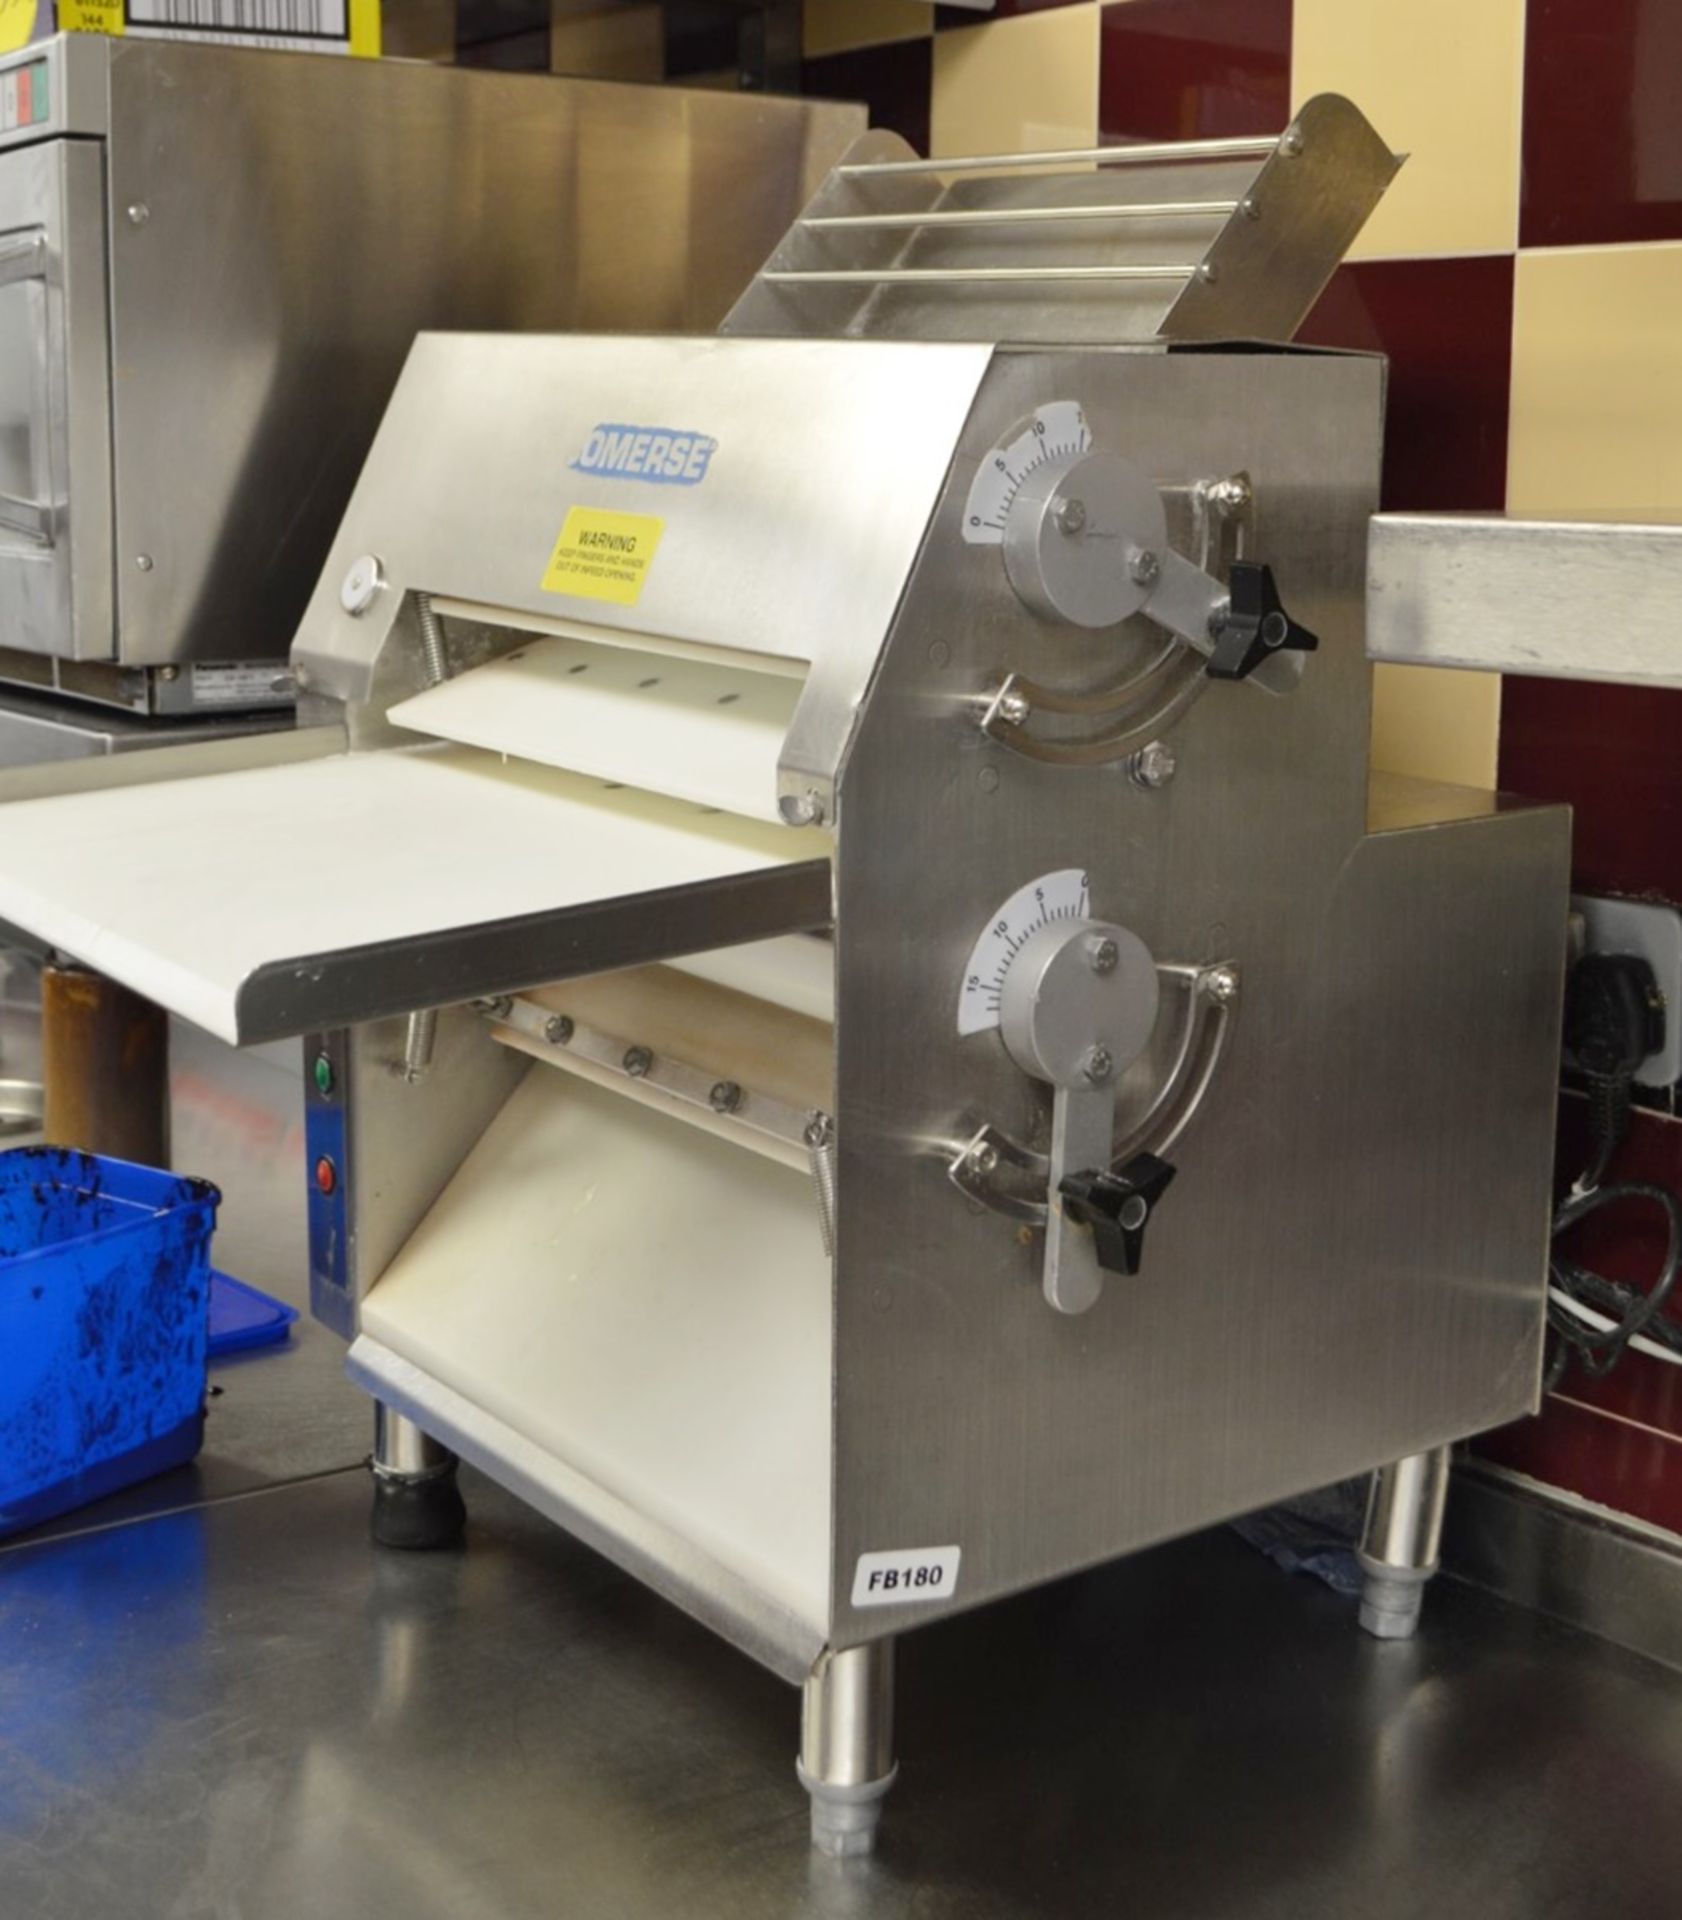 1 x Somerset Dough Roller - Model CDR1550 - Suitable For Pizza, Naans, Chatati Wraps etc - Ref FB180 - Image 2 of 6